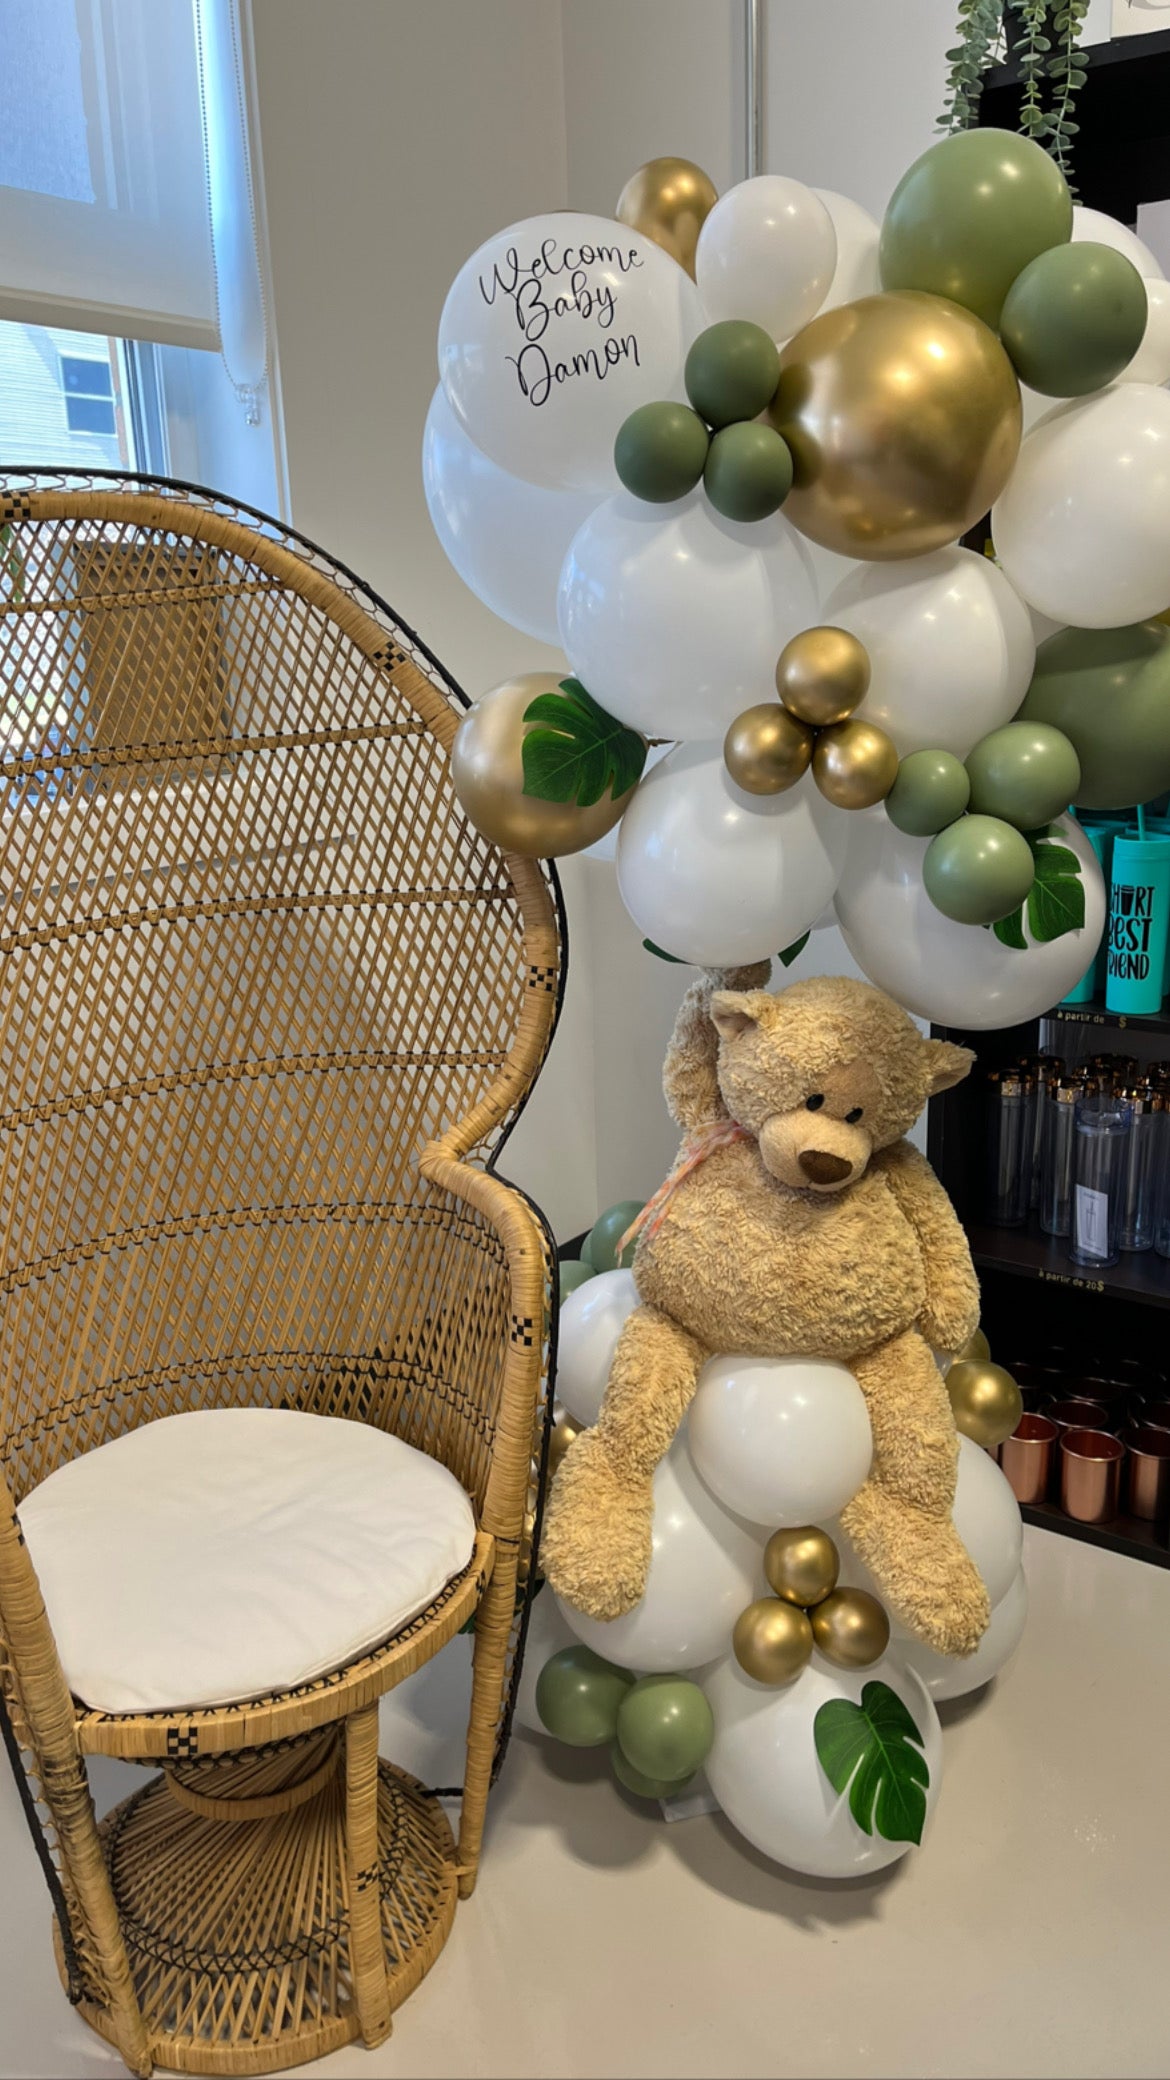 Teddy Bear Stand with Balloons